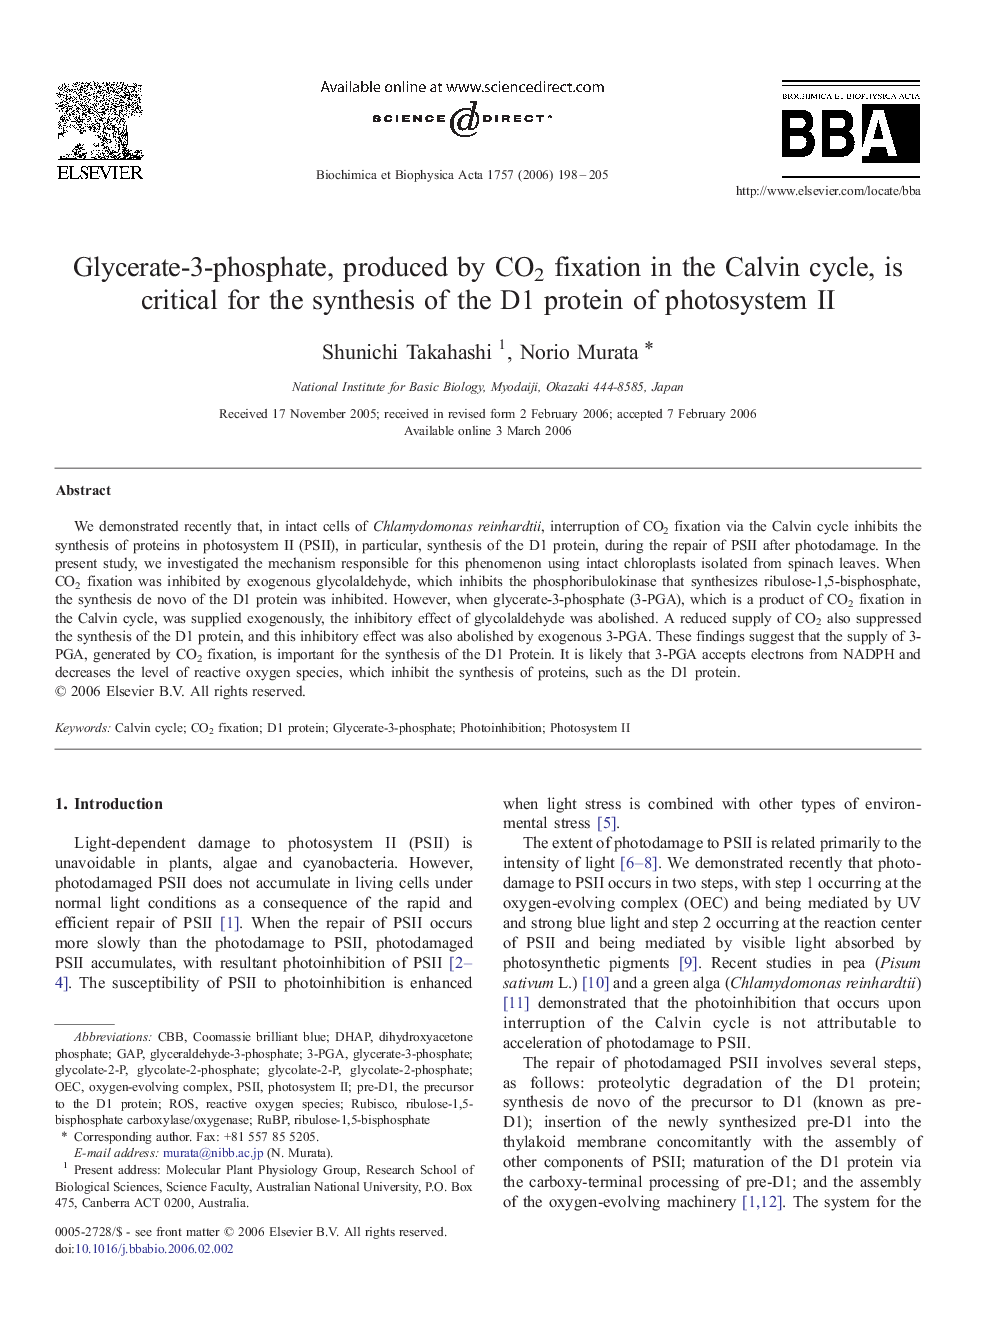 Glycerate-3-phosphate, produced by CO2 fixation in the Calvin cycle, is critical for the synthesis of the D1 protein of photosystem II